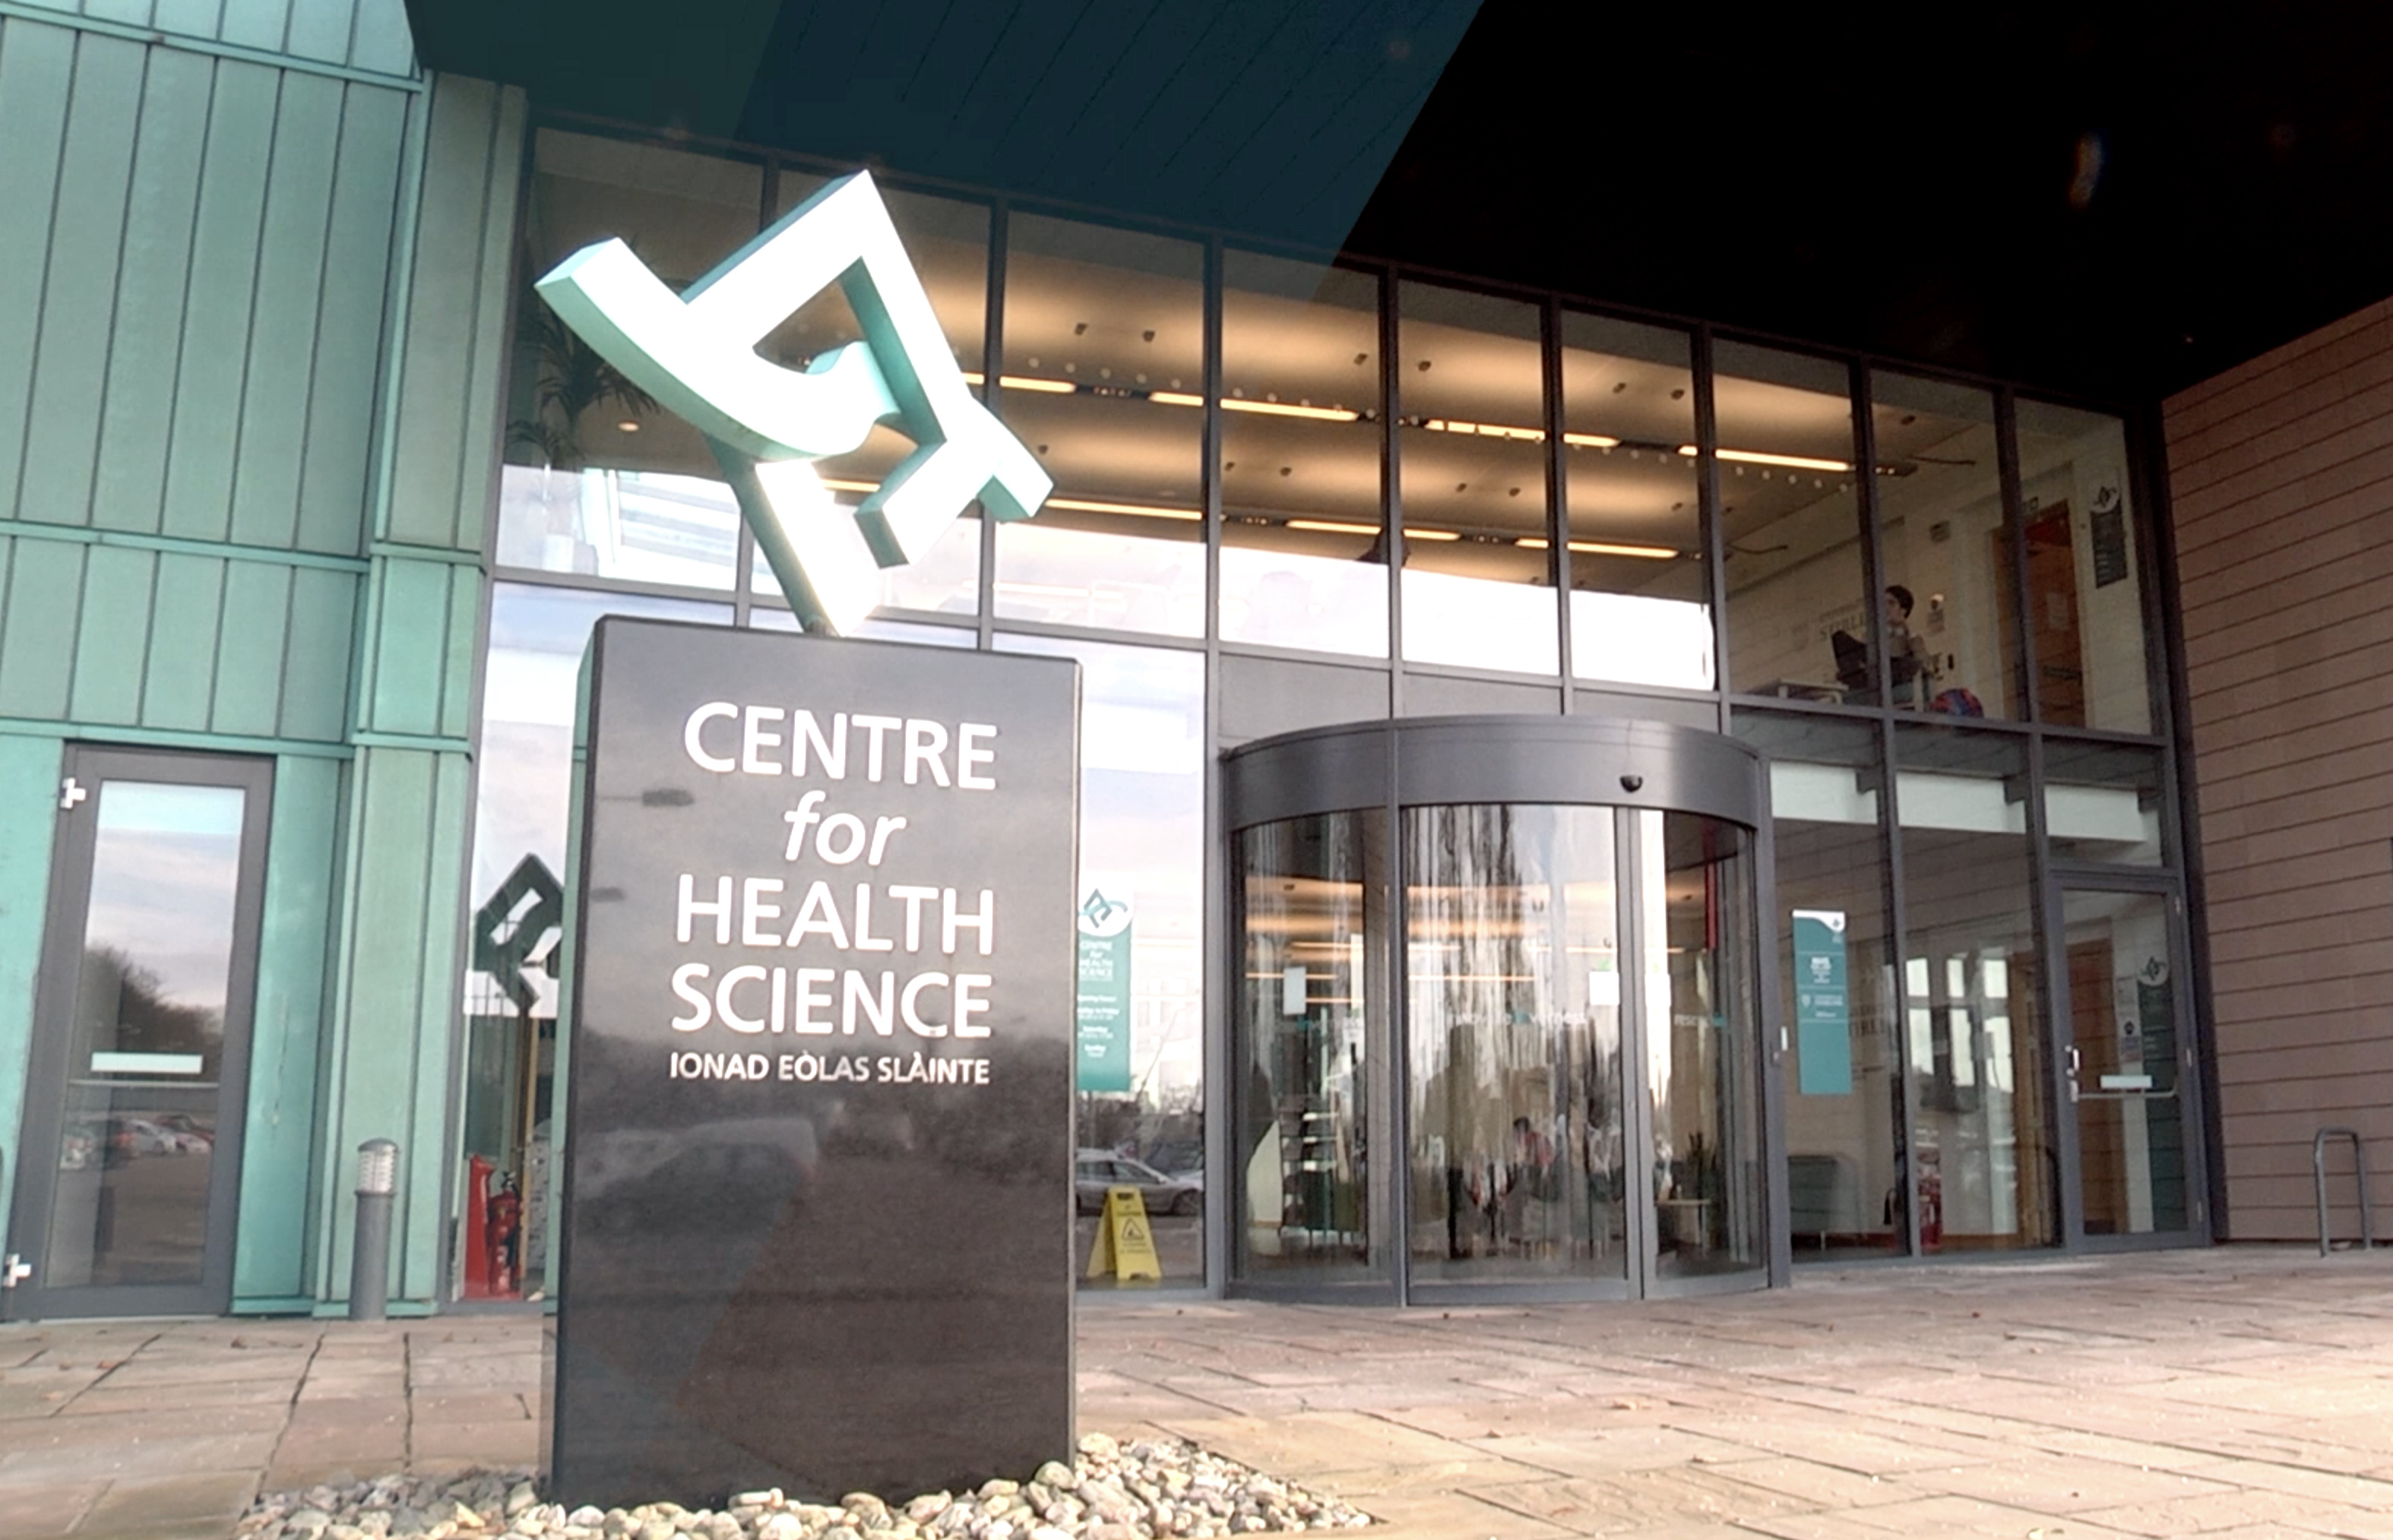 UHI has taken over ownership of the Centre for Health Science building in a £9million deal